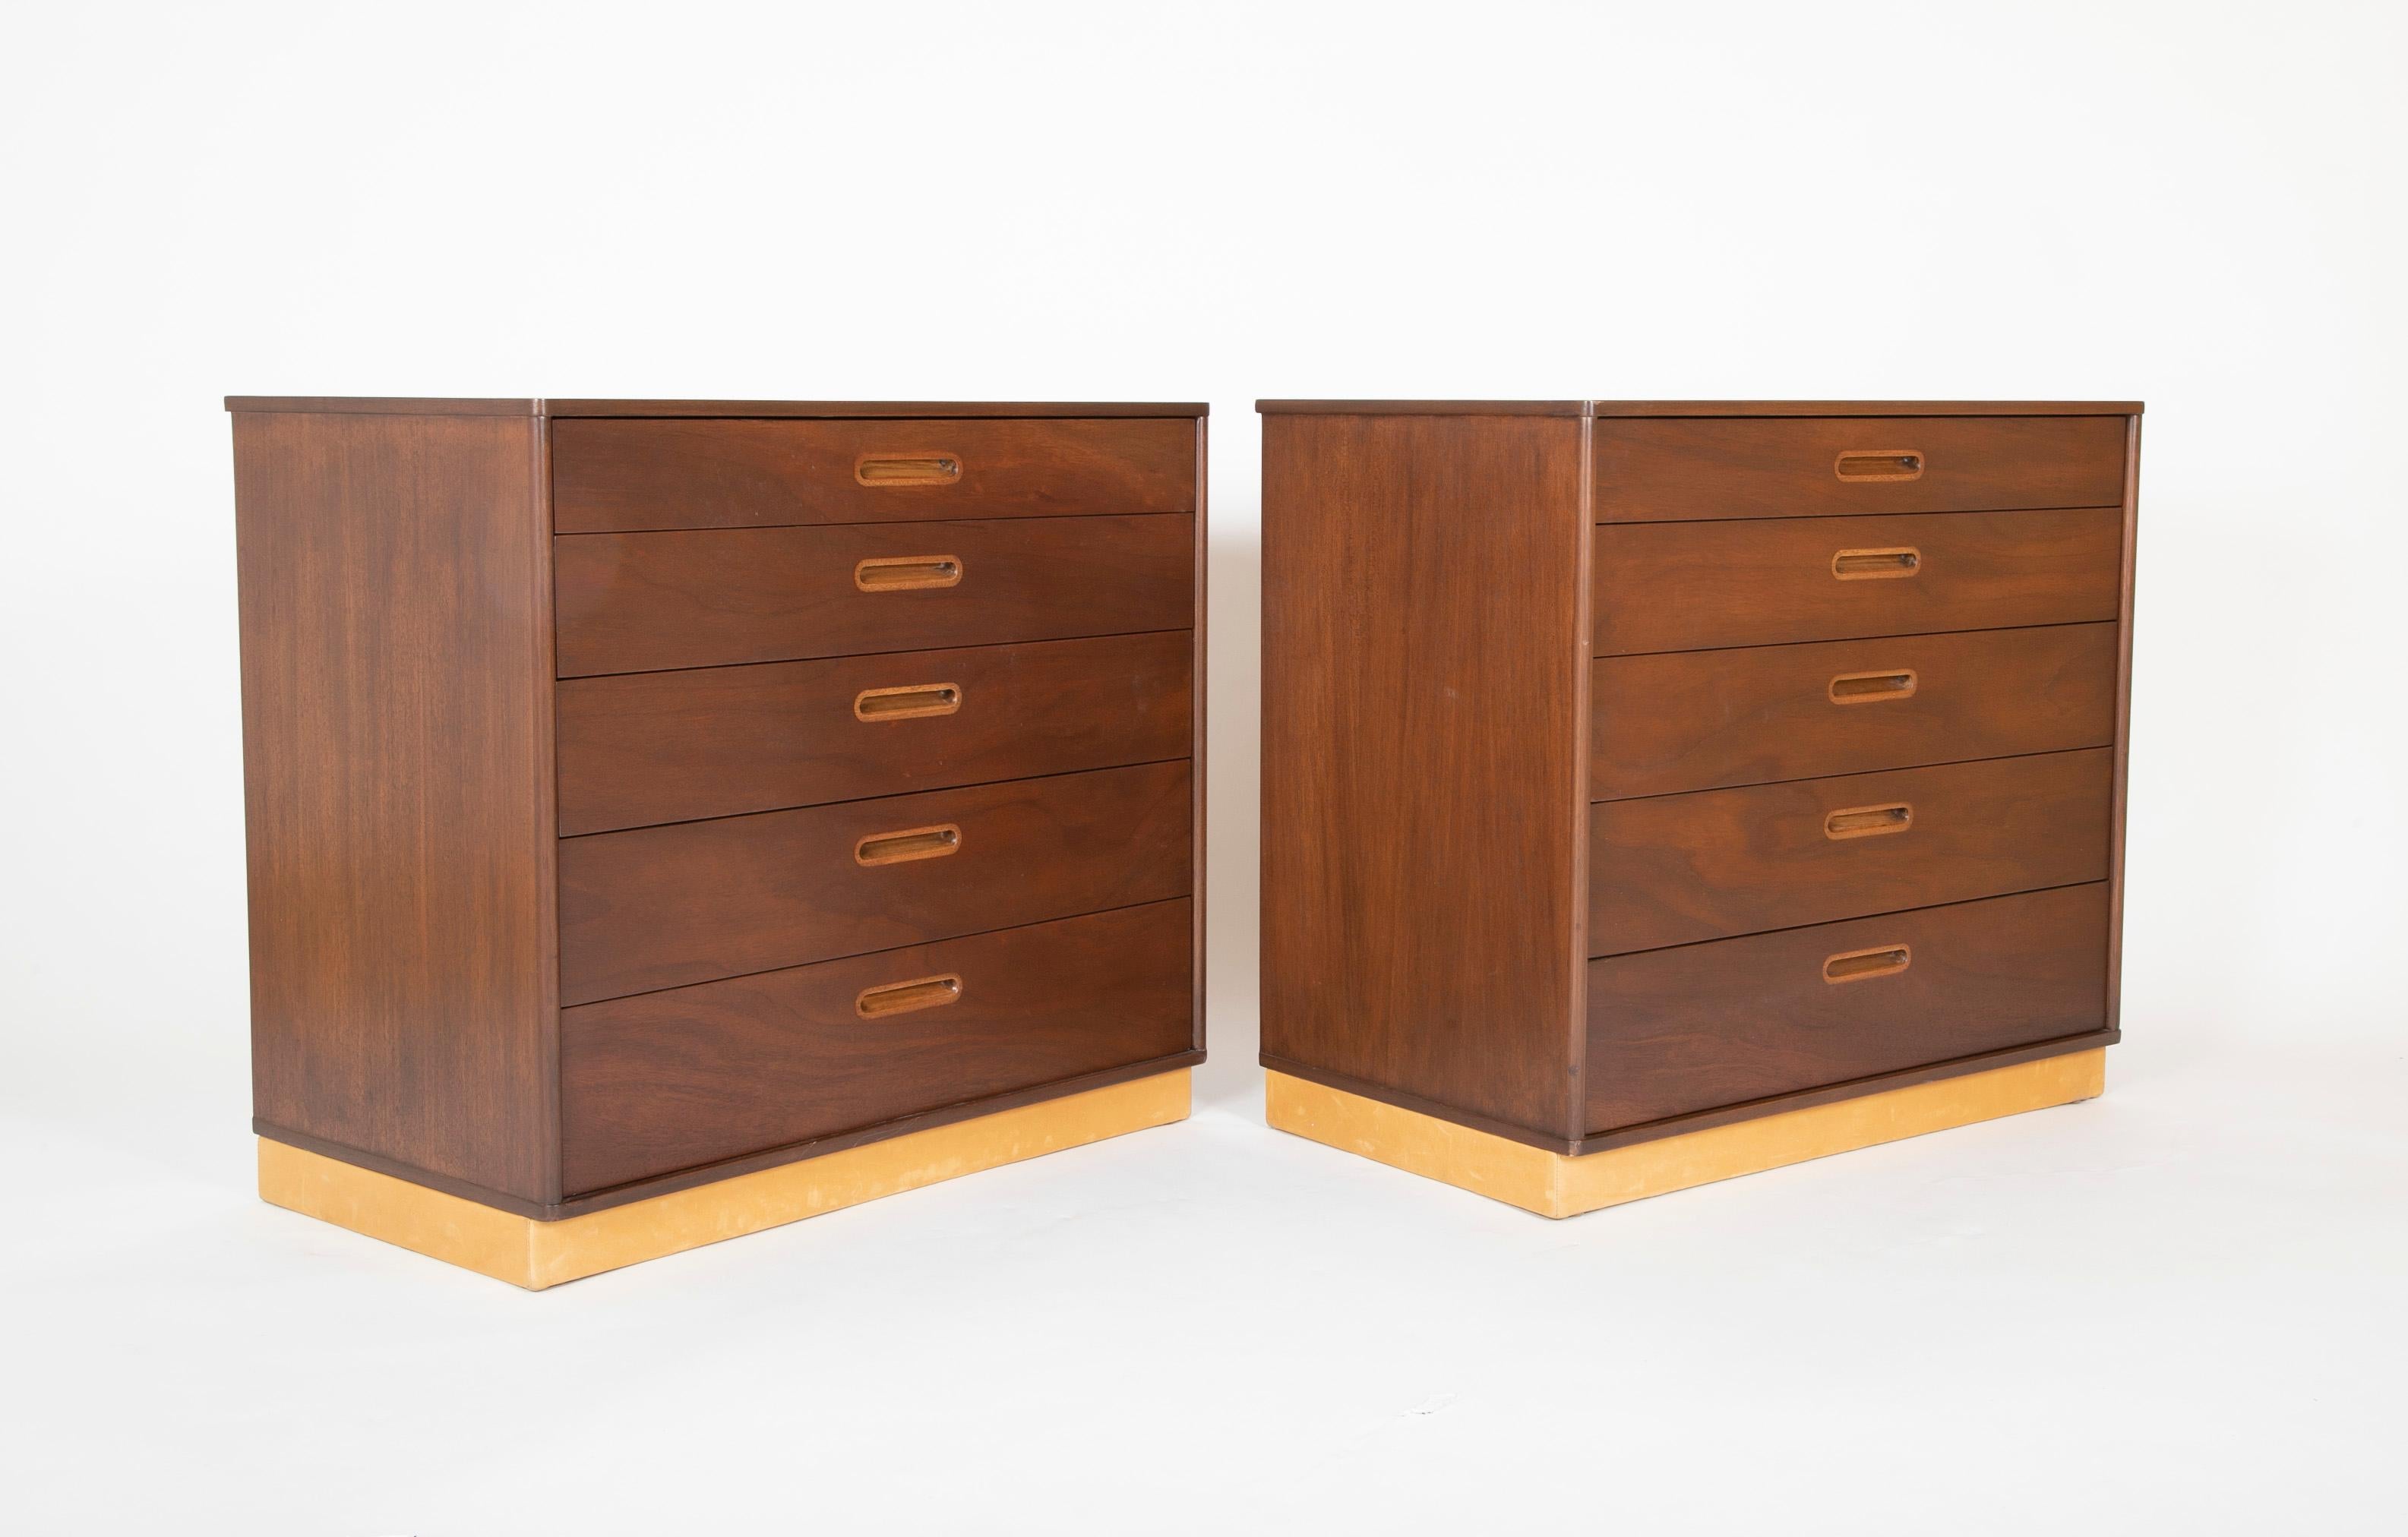 A pair of chests in walnut with leather wrapped baseboards and blond handles. Designed by Edward Wormley for Dunbar, circa 1955.